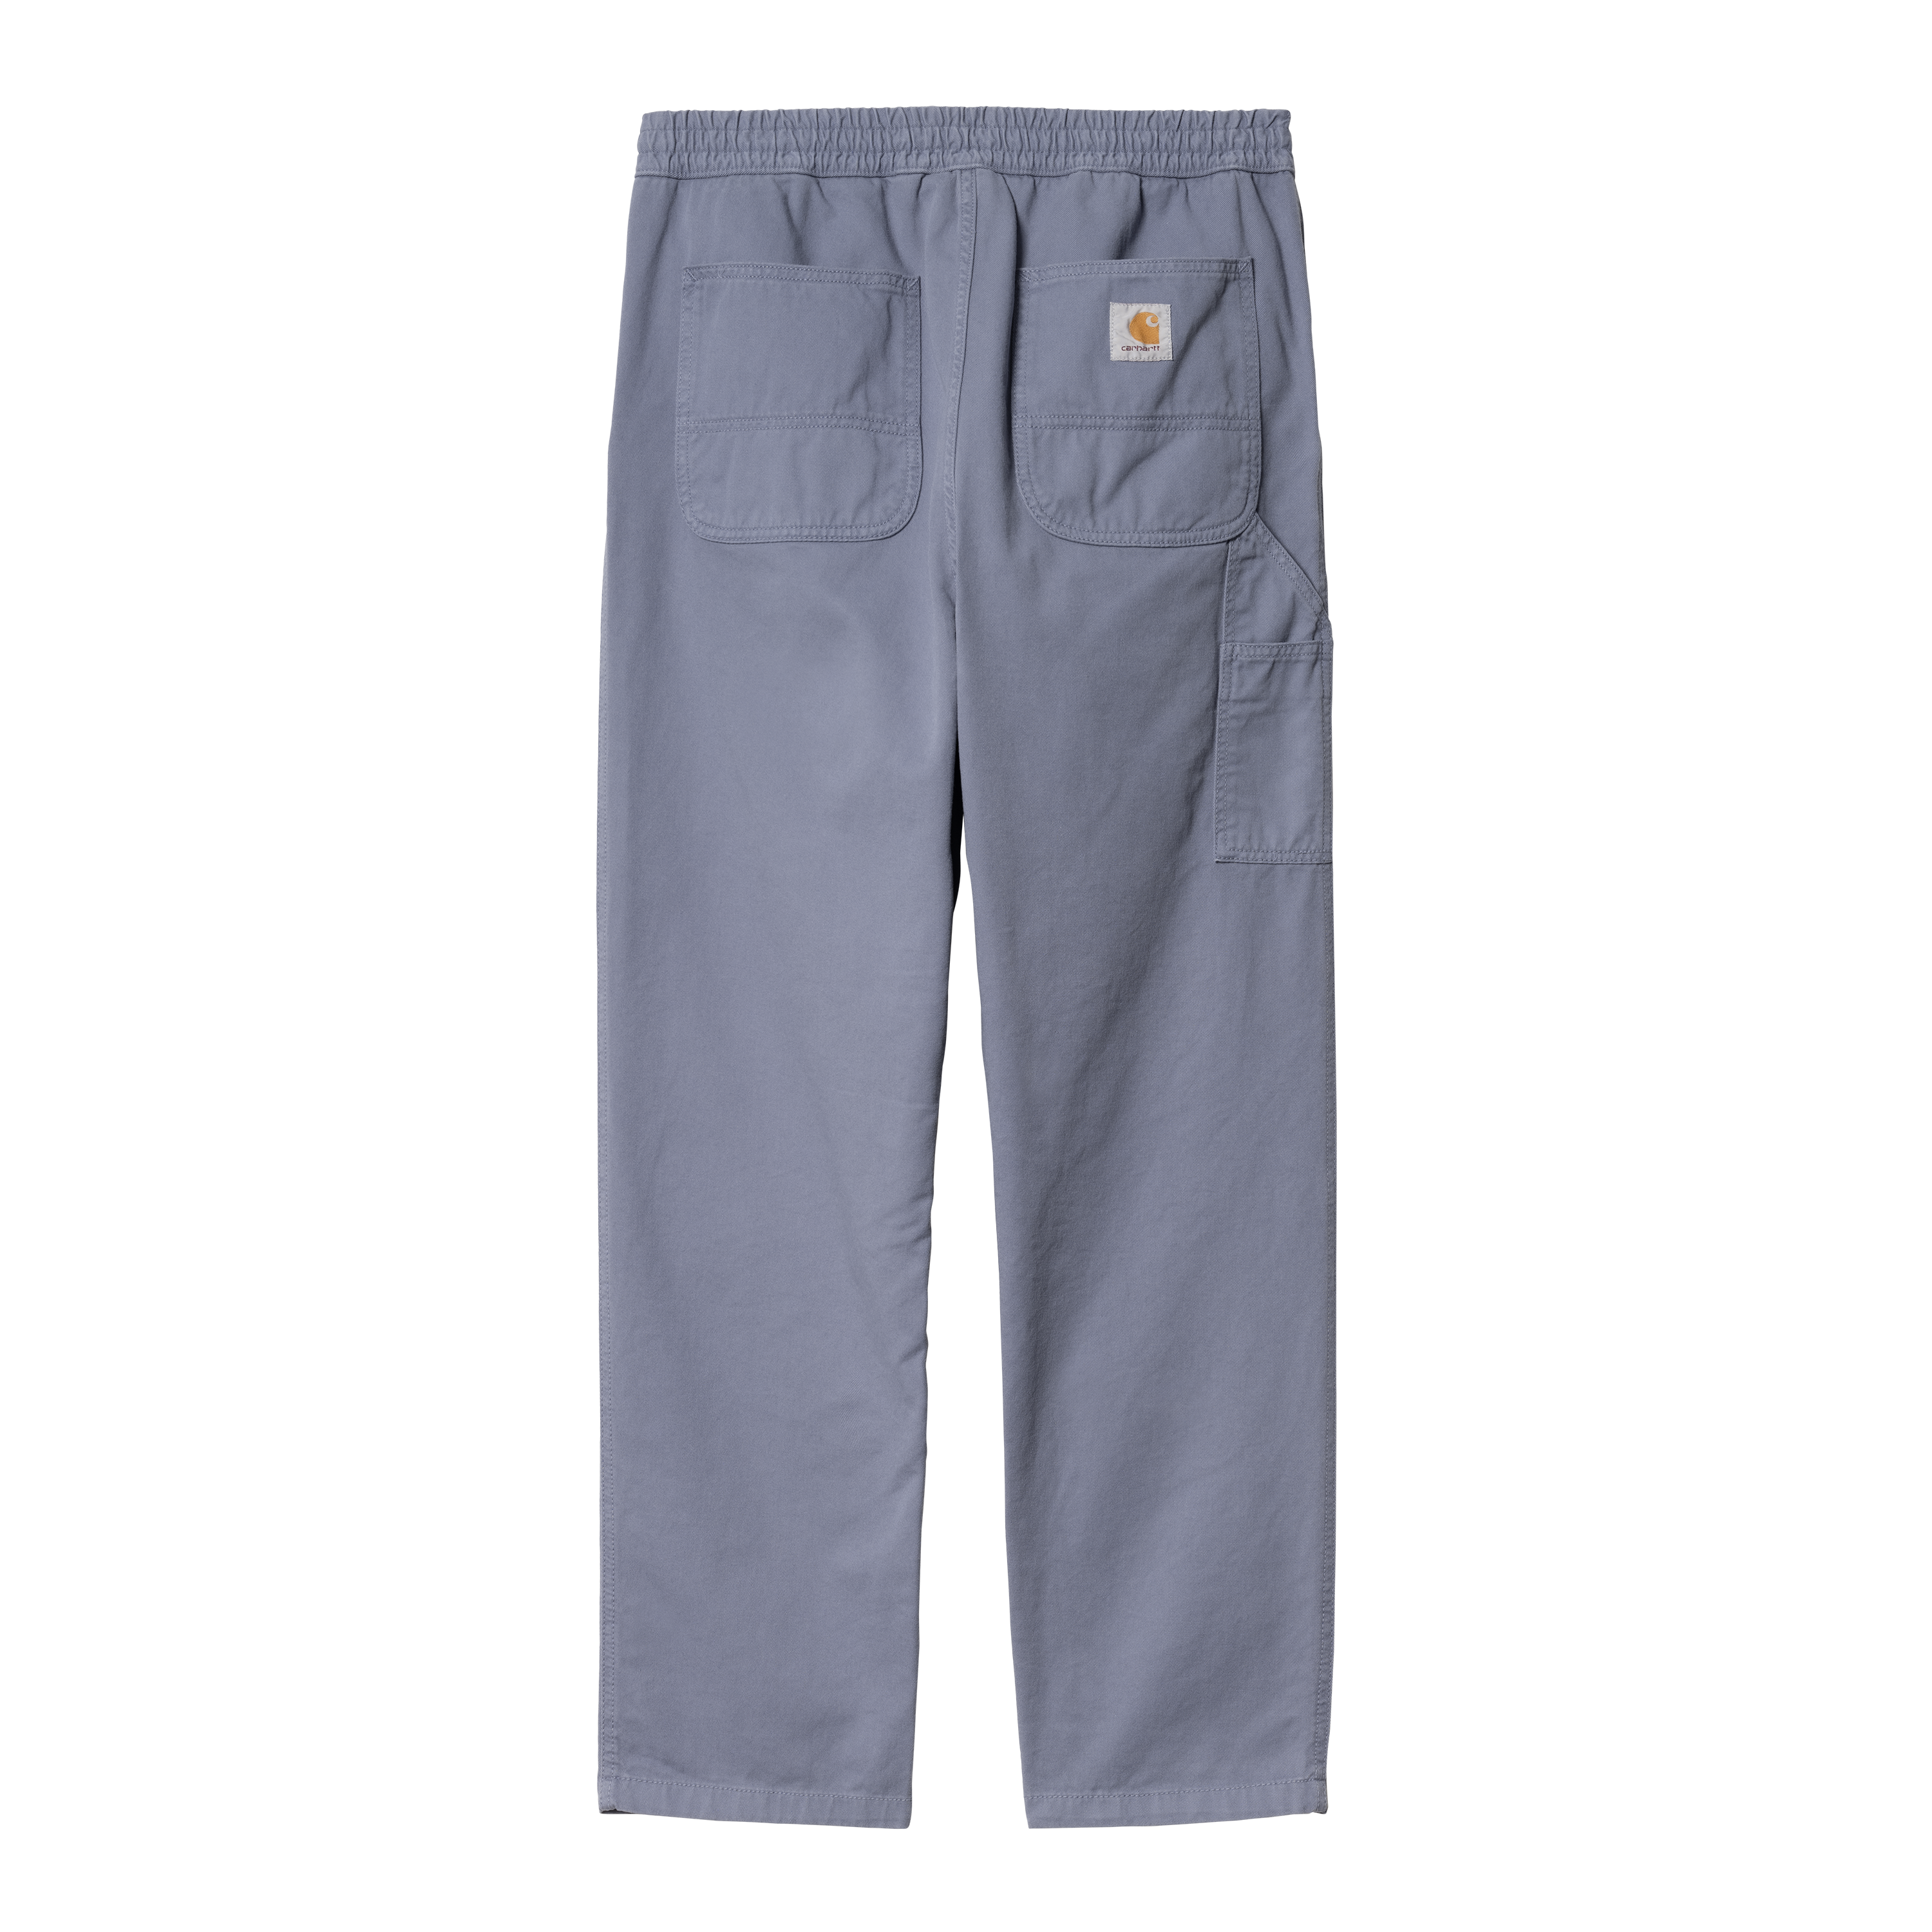 Carhartt WIP- Landon Pant $202 Pleasures Poor Connection T- $65 Taikan  waffle knit- $90 Bonnie Clyde Show and Tell- $201 Spring 2023. Av